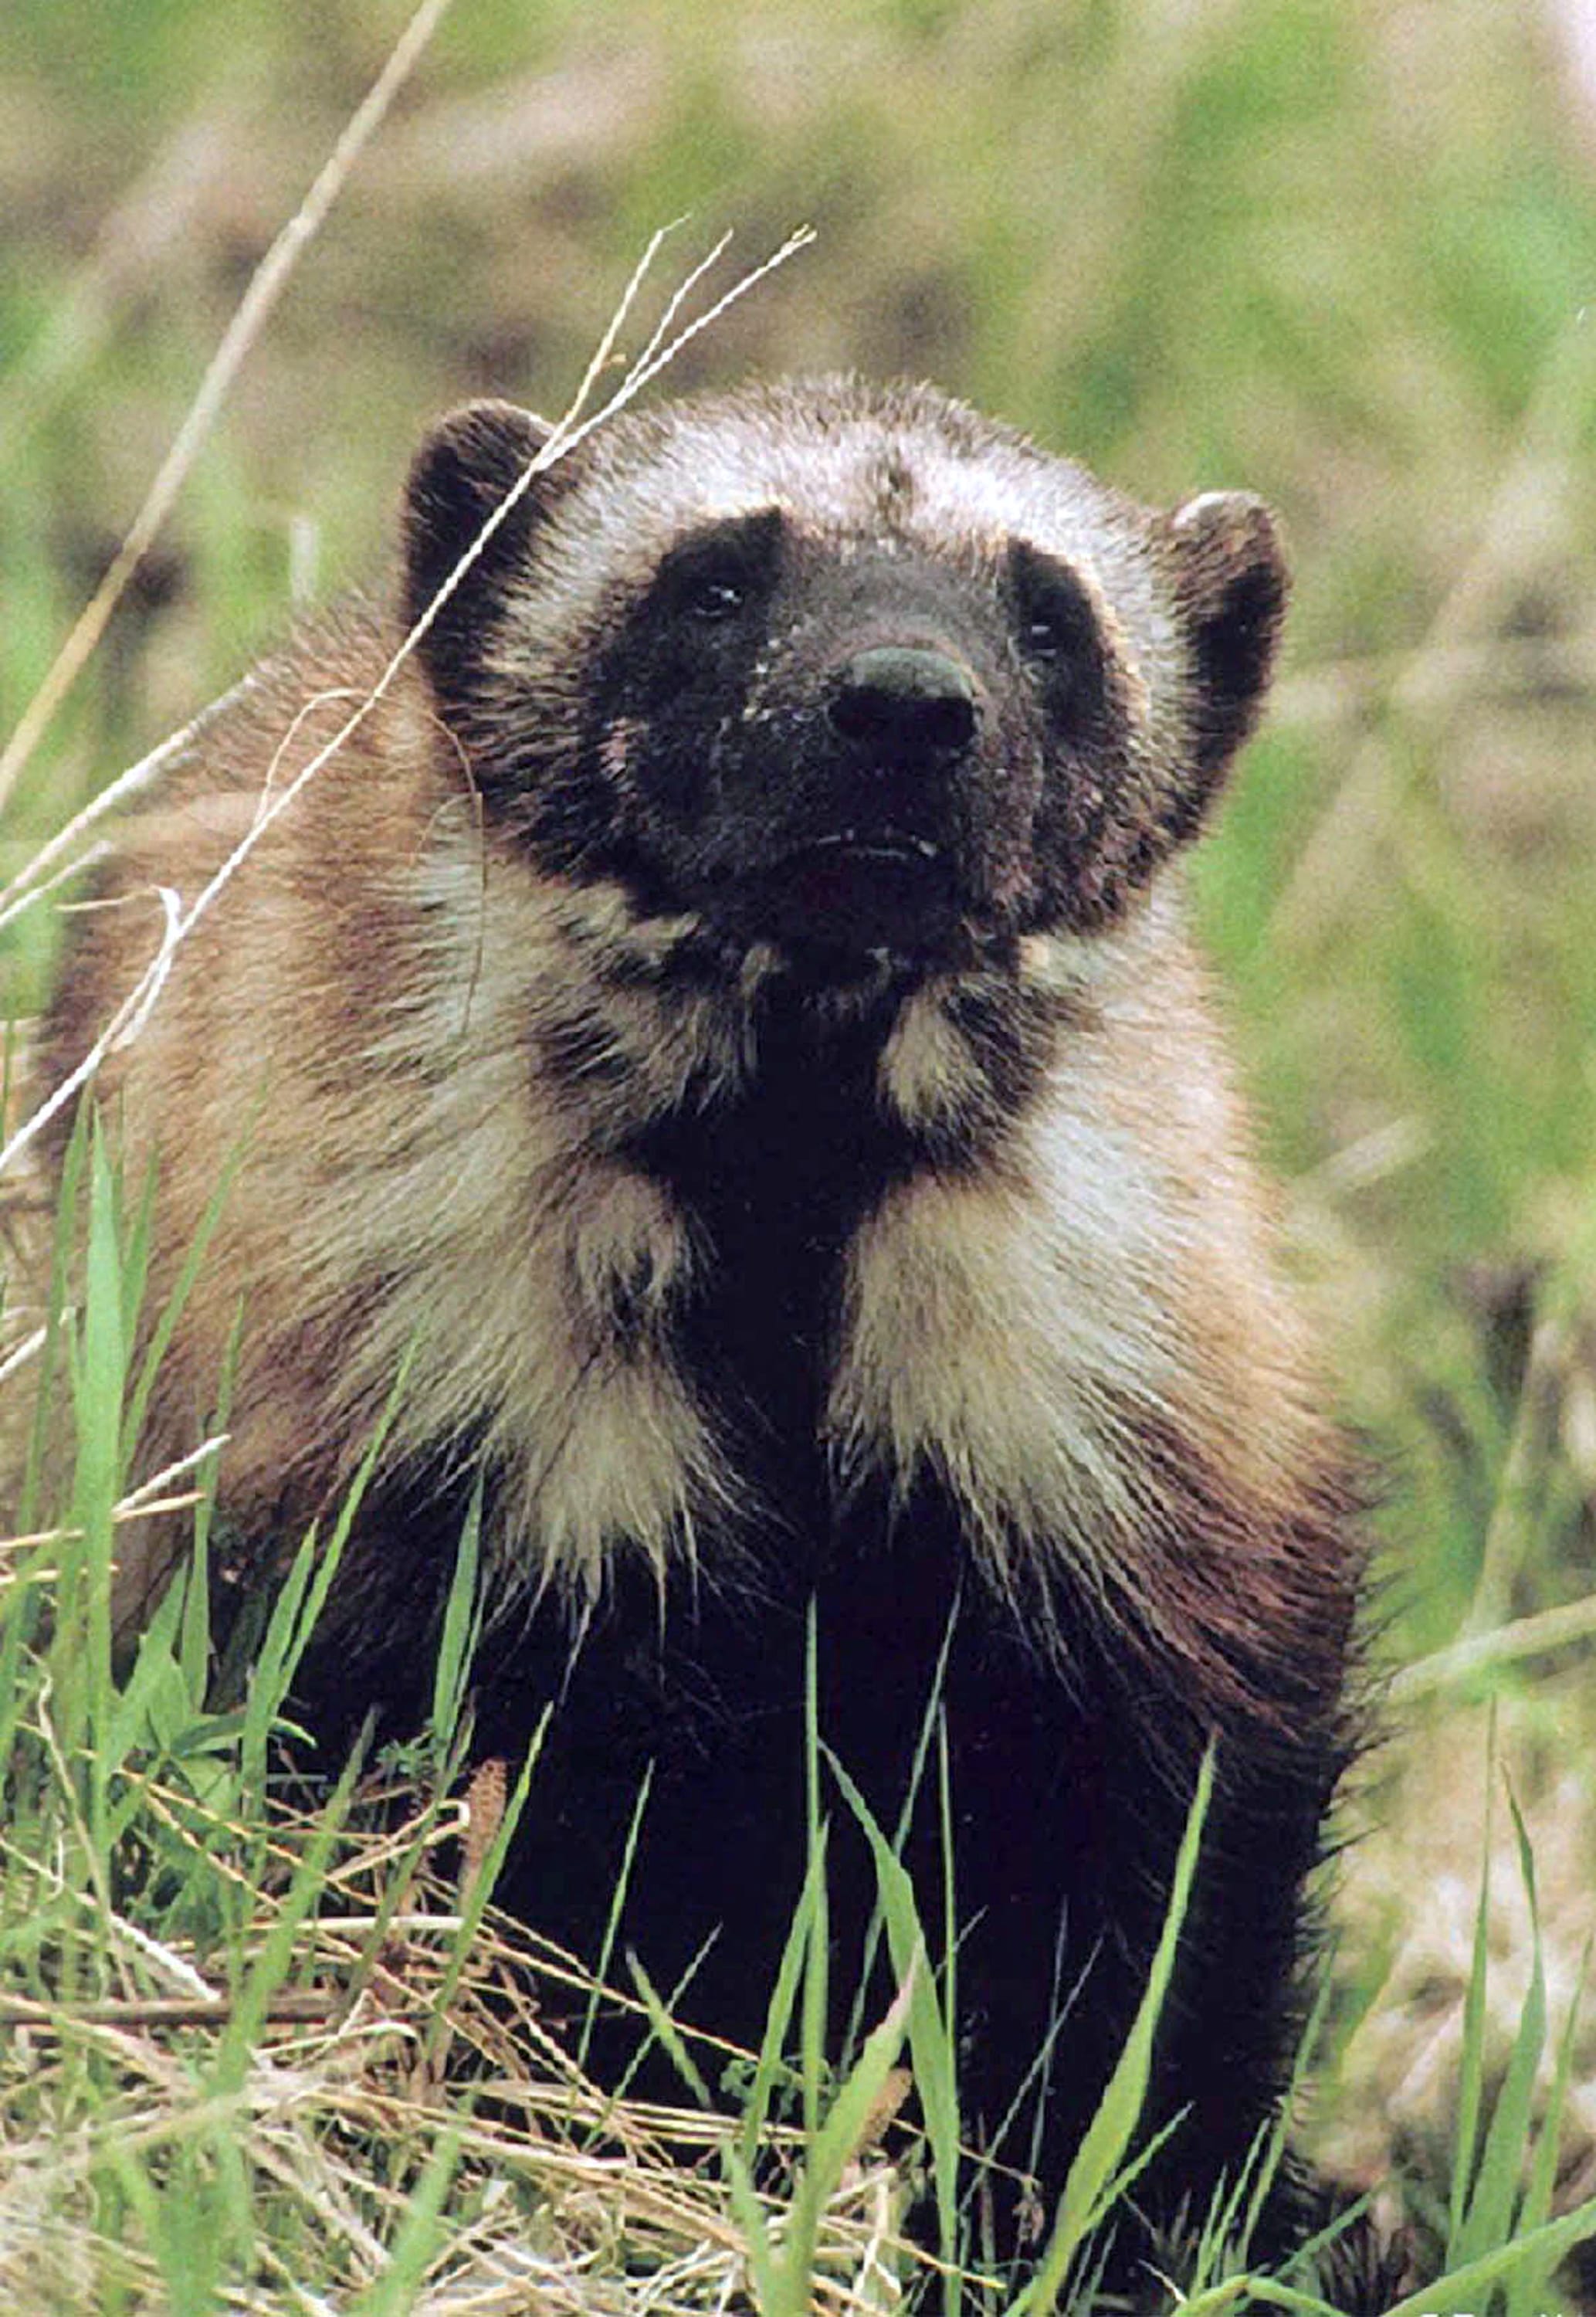 FILE - This undated file photo shows a wolverine in Montana's Glacier National Park. Researchers are working on a plan to study wolverines in four Rocky Mountain states in the winter of 2016 to see if the animals can be reintroduced to some regions to boost their numbers and see how they might travel between mountain ranges. A researcher for Montana's wildlife agency says that state, Idaho, Wyoming and Washington are working together because there are so few wolverines and they are spread across a wide area.